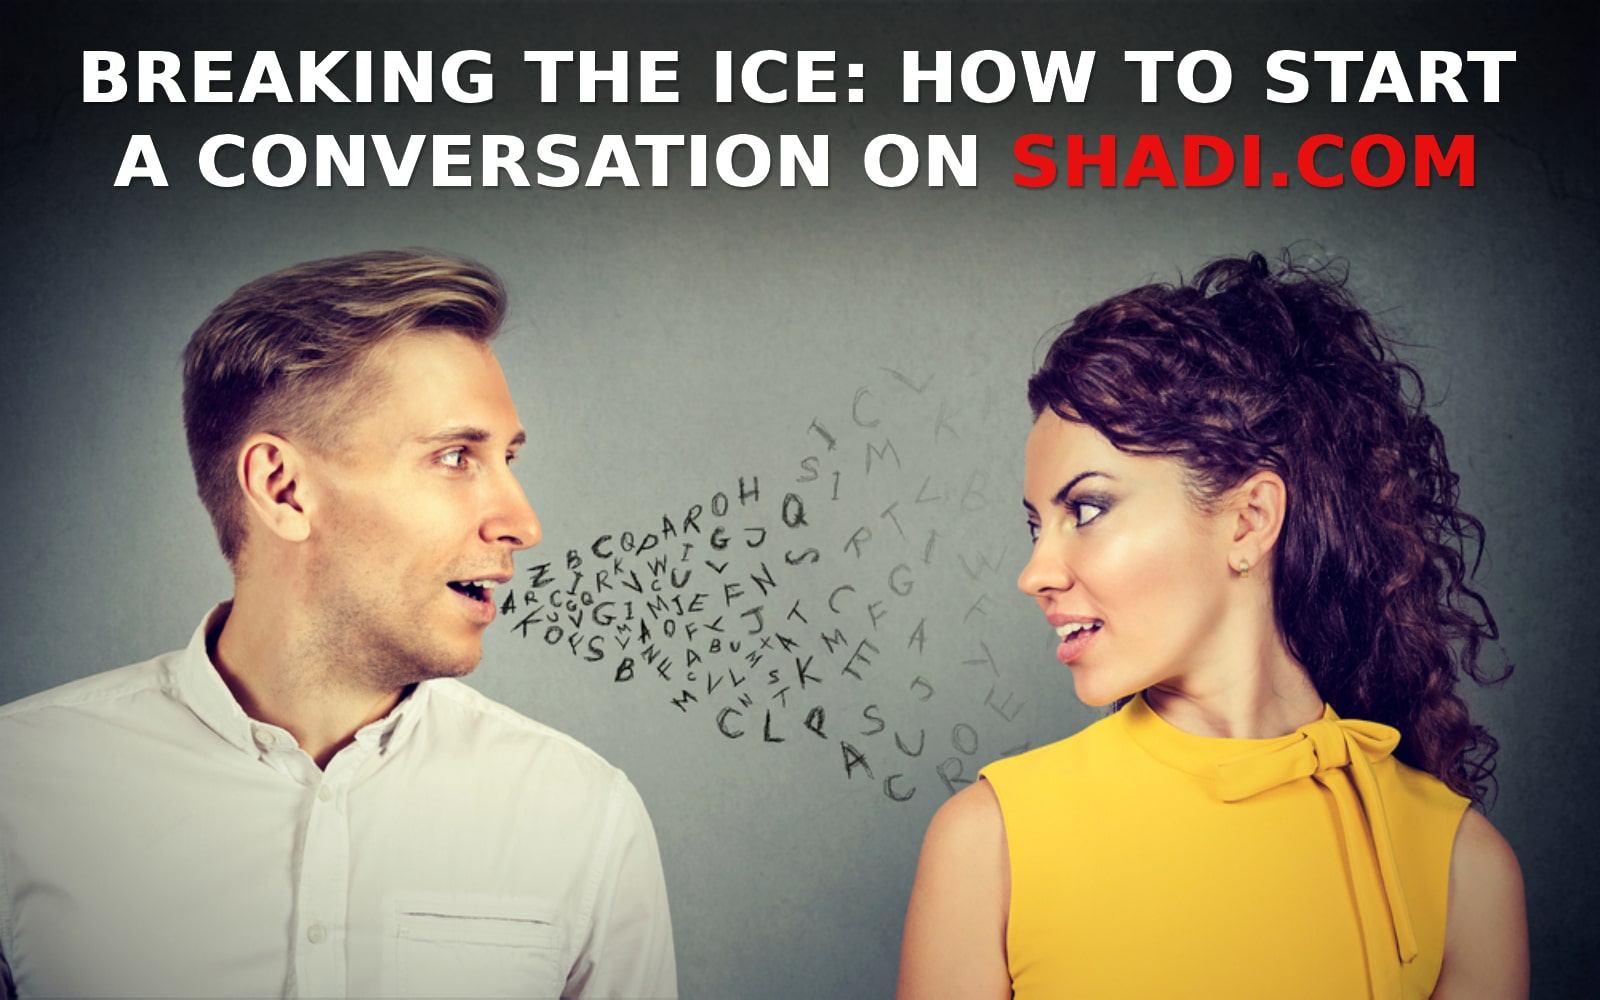 Breaking the Ice: How to Start a Conversation on Shadi.com